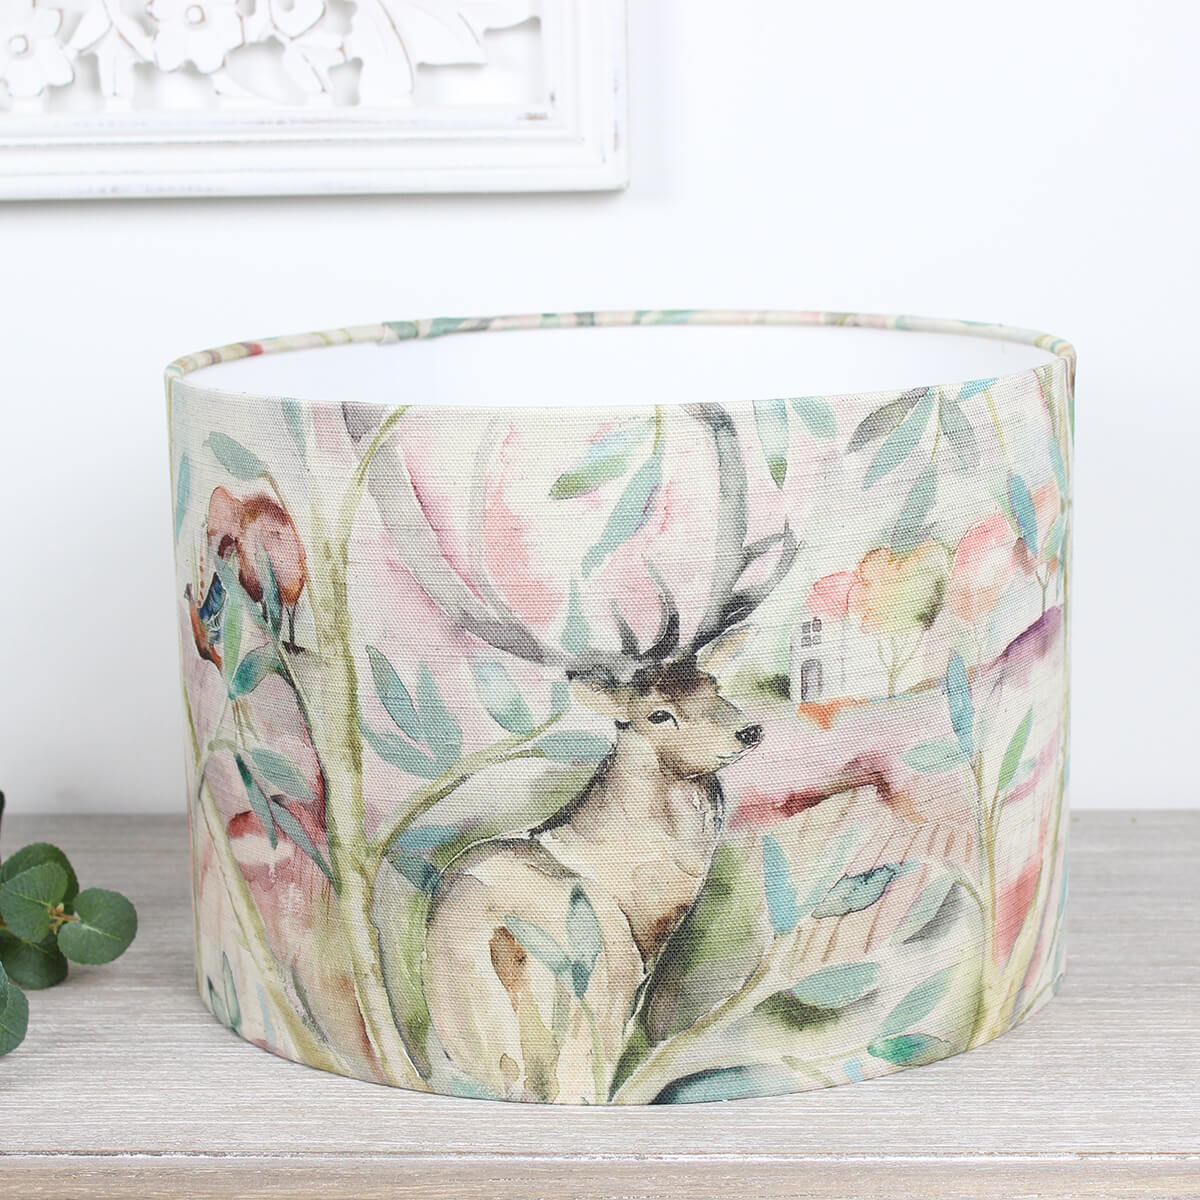 Winlater Russet Stag Deer Voyage Maison Lampshade